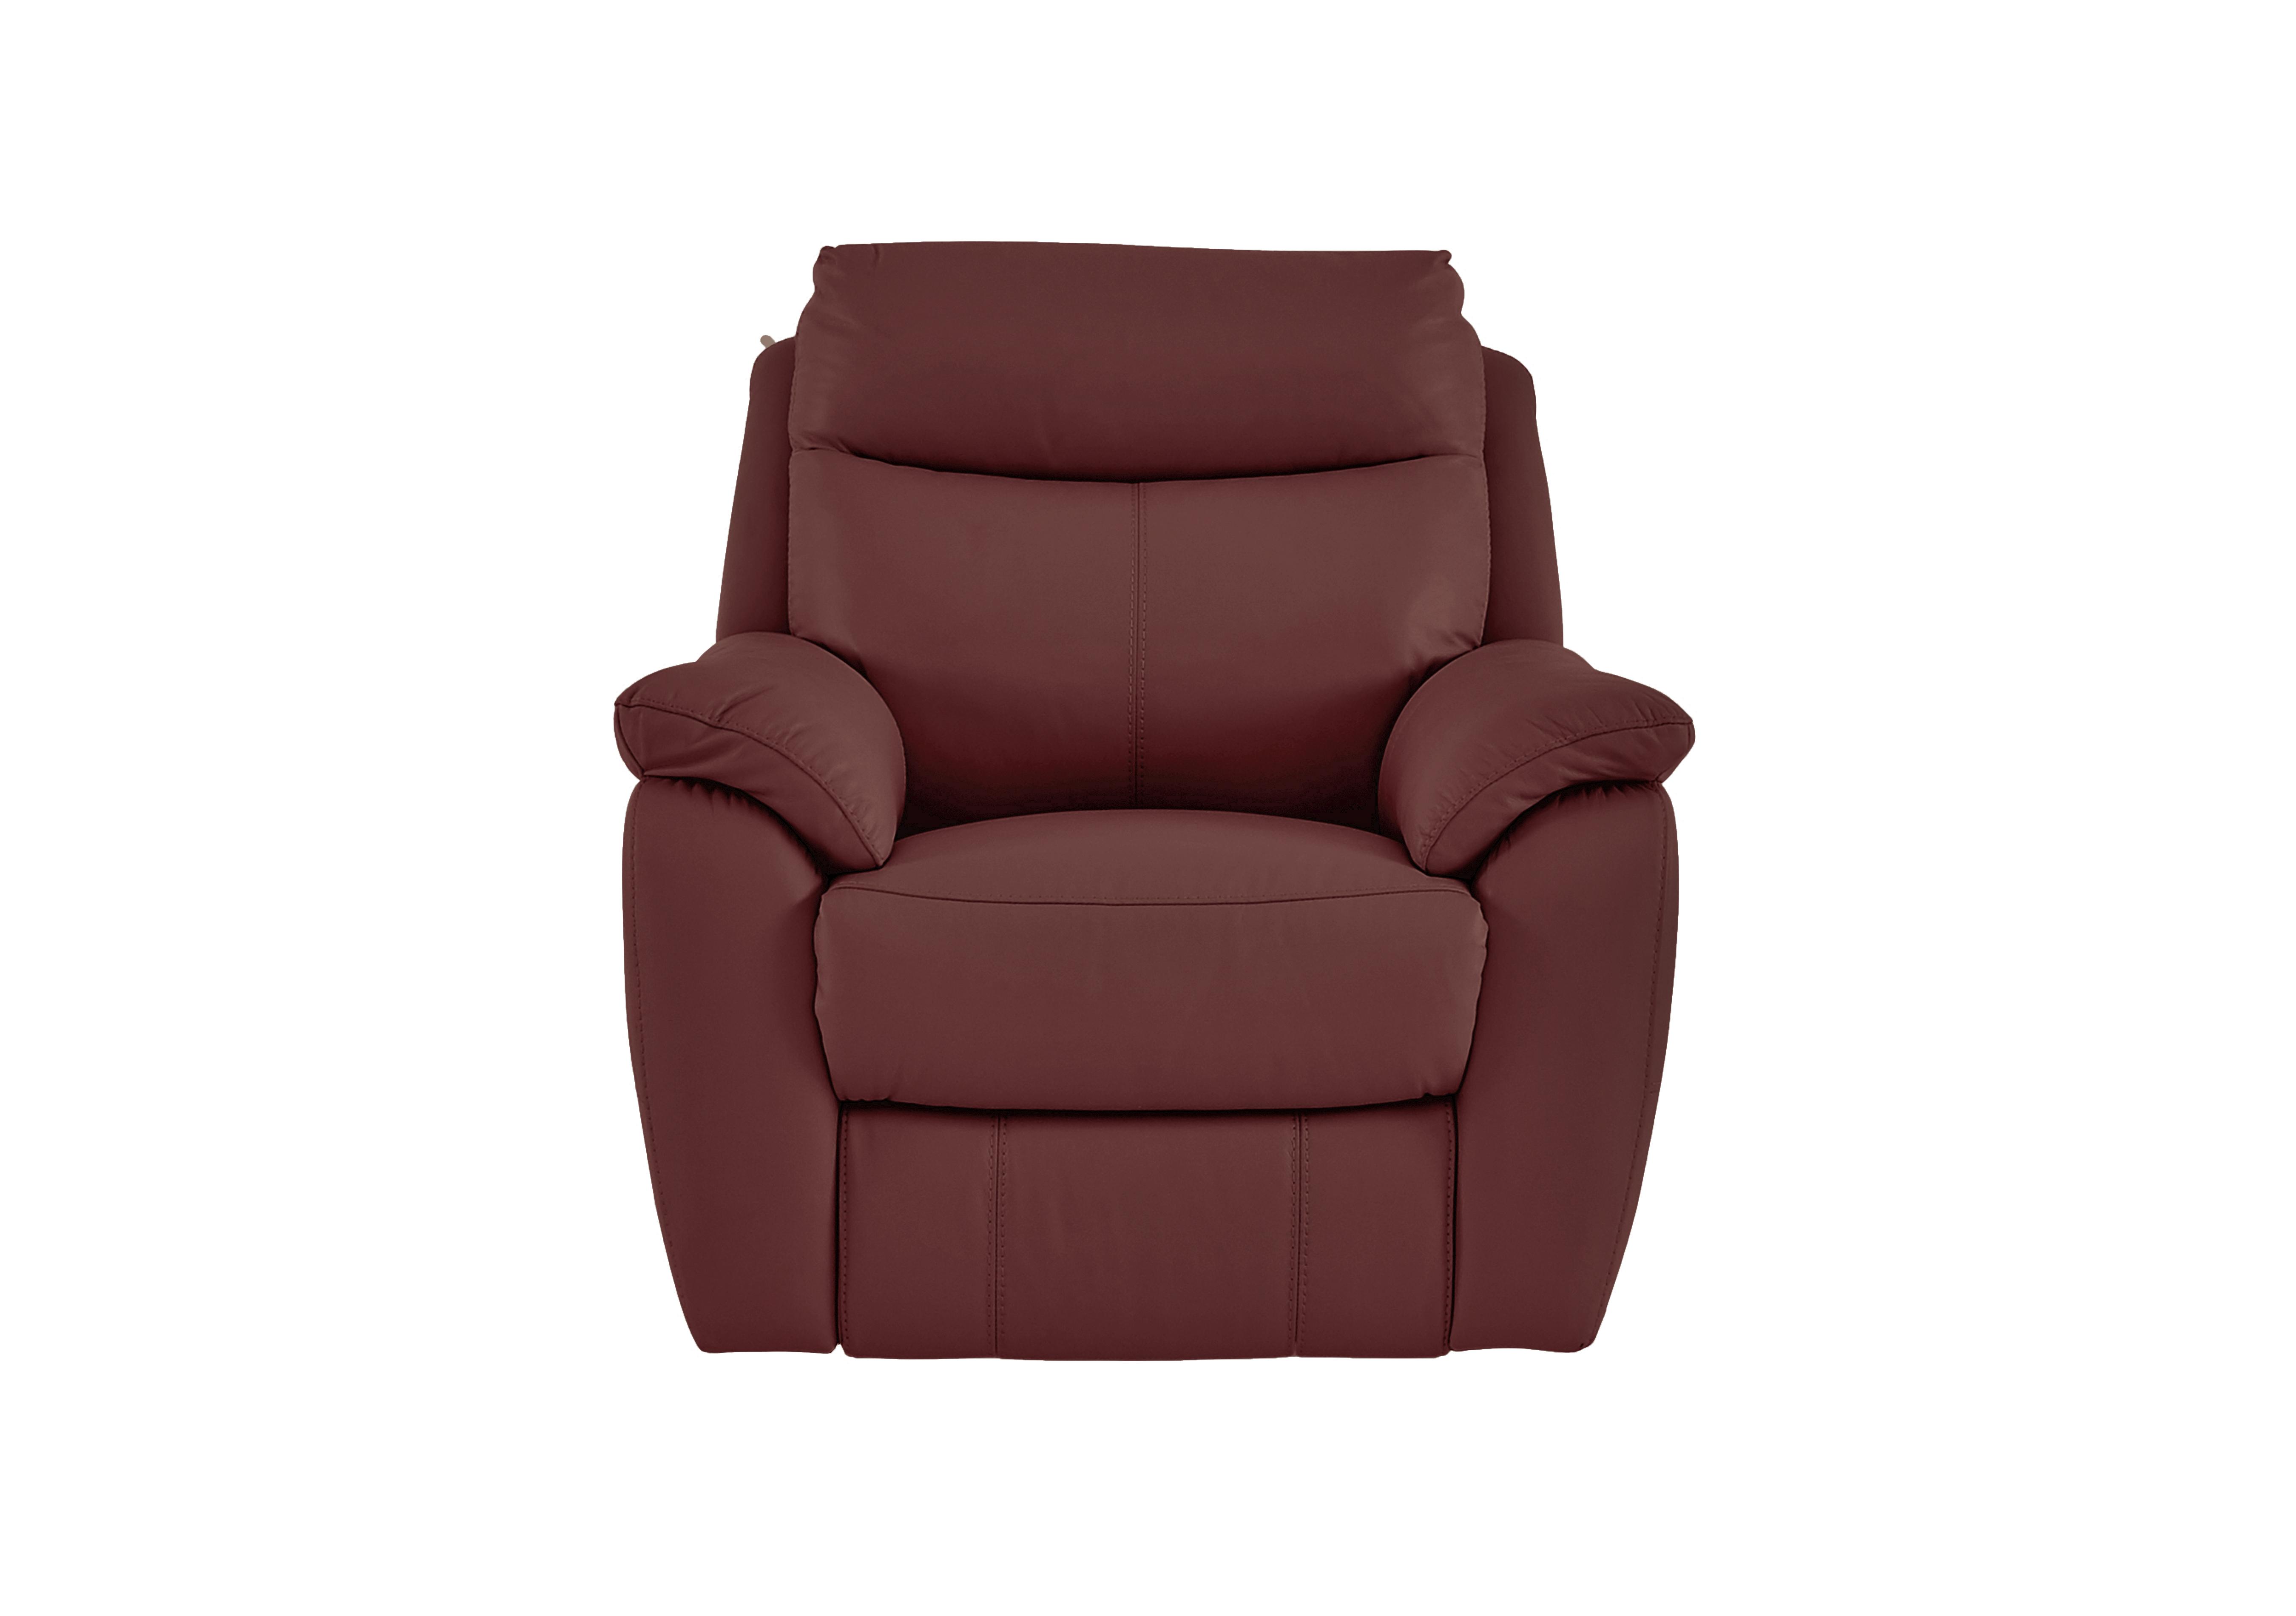 Snug Leather Armchair in Bv-035c Deep Red on Furniture Village